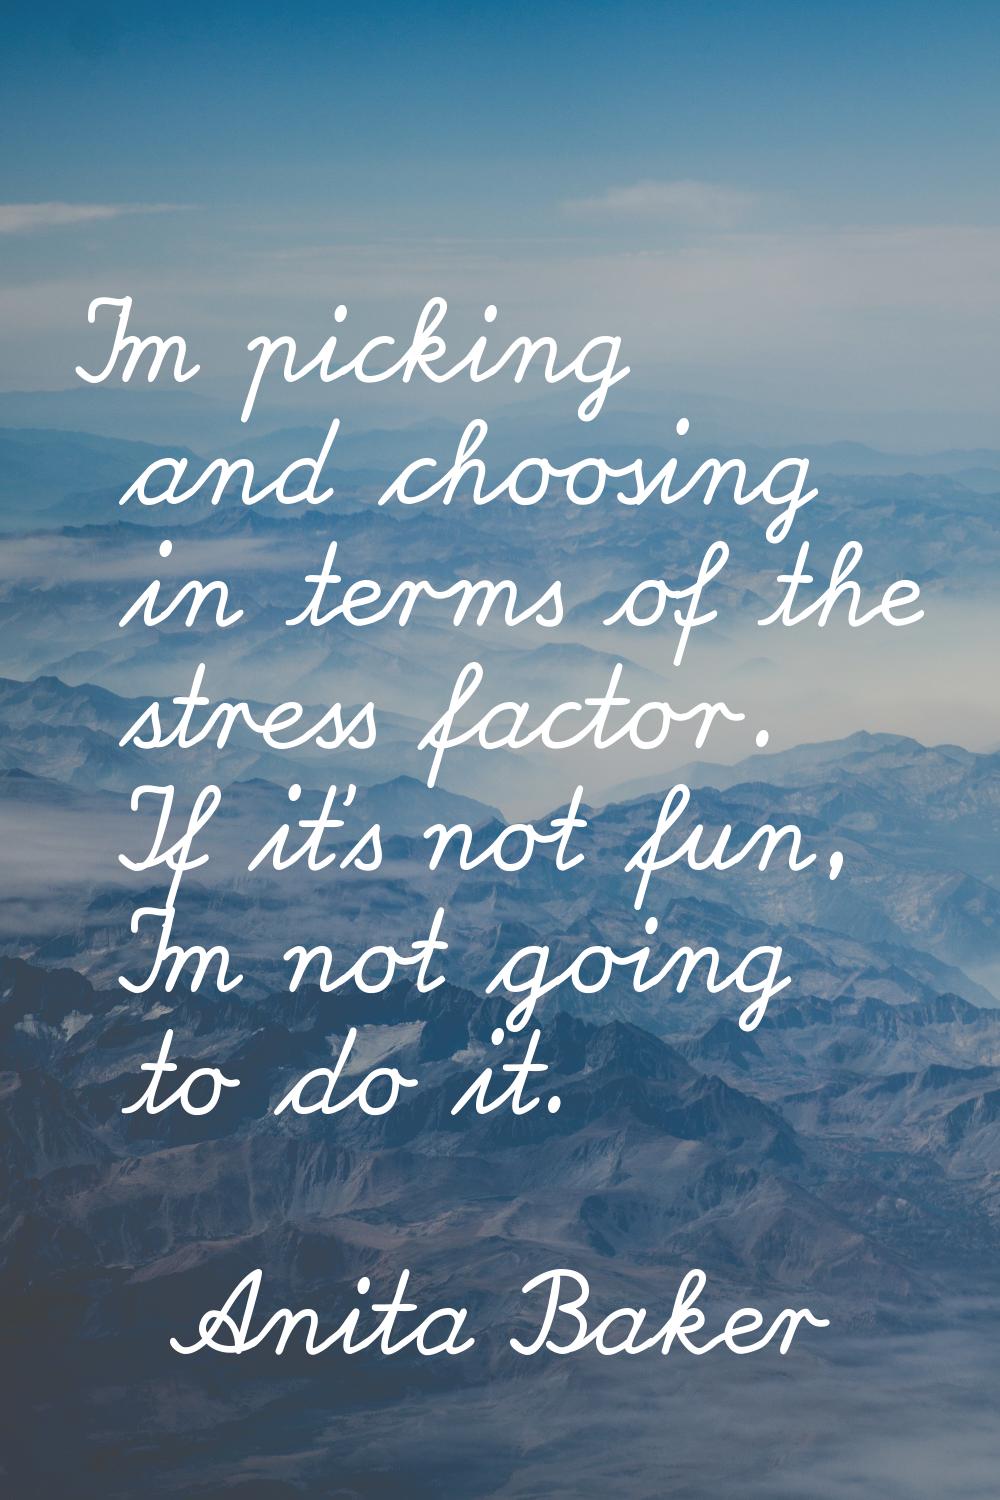 I'm picking and choosing in terms of the stress factor. If it's not fun, I'm not going to do it.